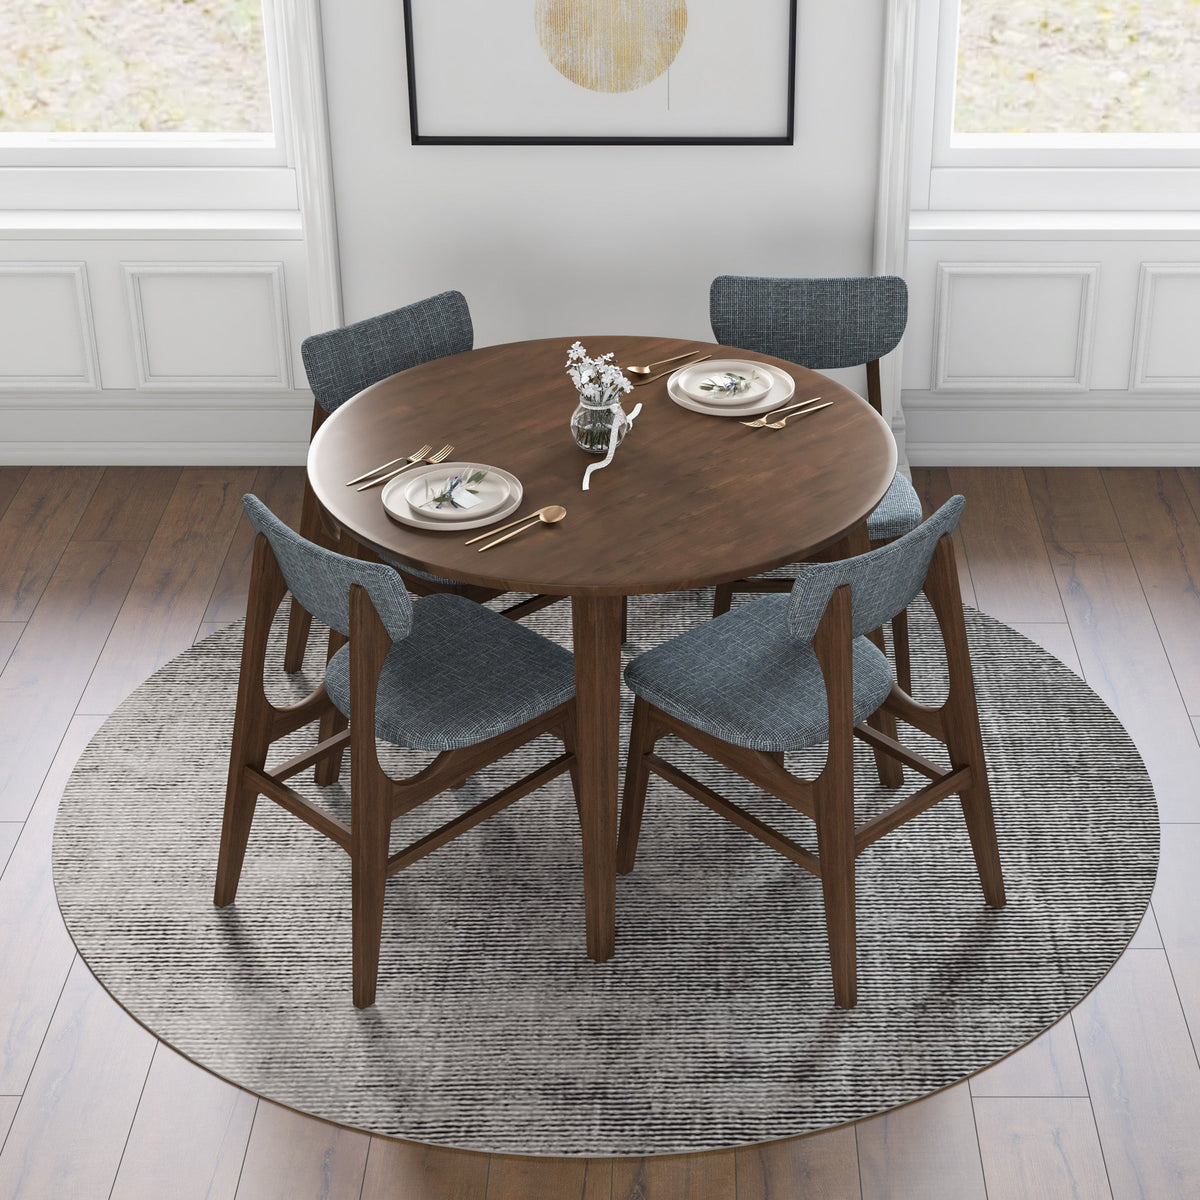 Palmer (Walnut) Round Dining Set with 4 Collins (Grey) Dining Chairs | Mid in Mod | Houston TX | Best Furniture stores in Houston